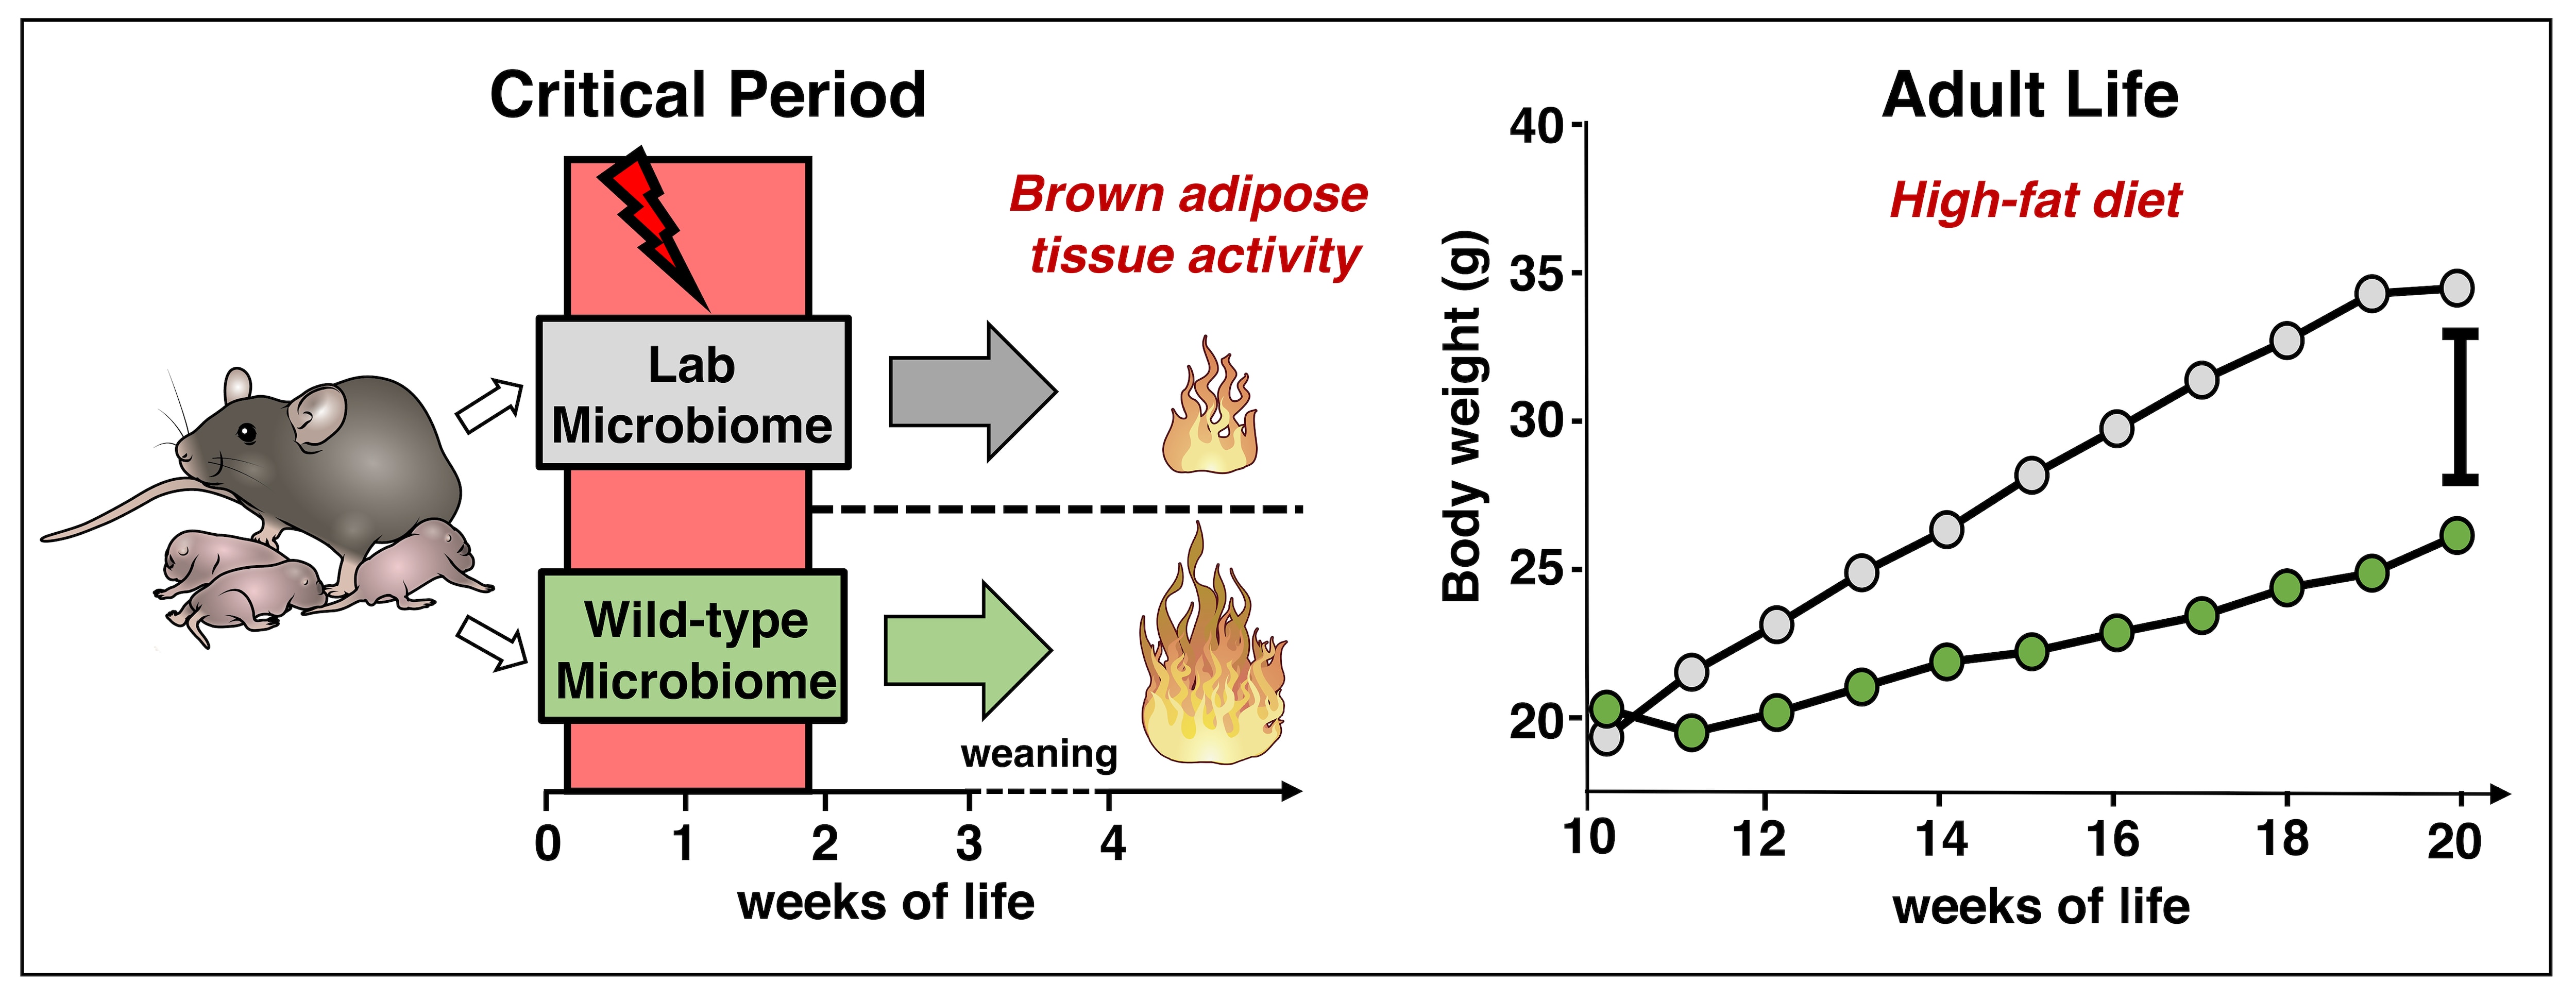 Diagram showing brown adipose tissue activity in lab vs. wild-type microbiomes.